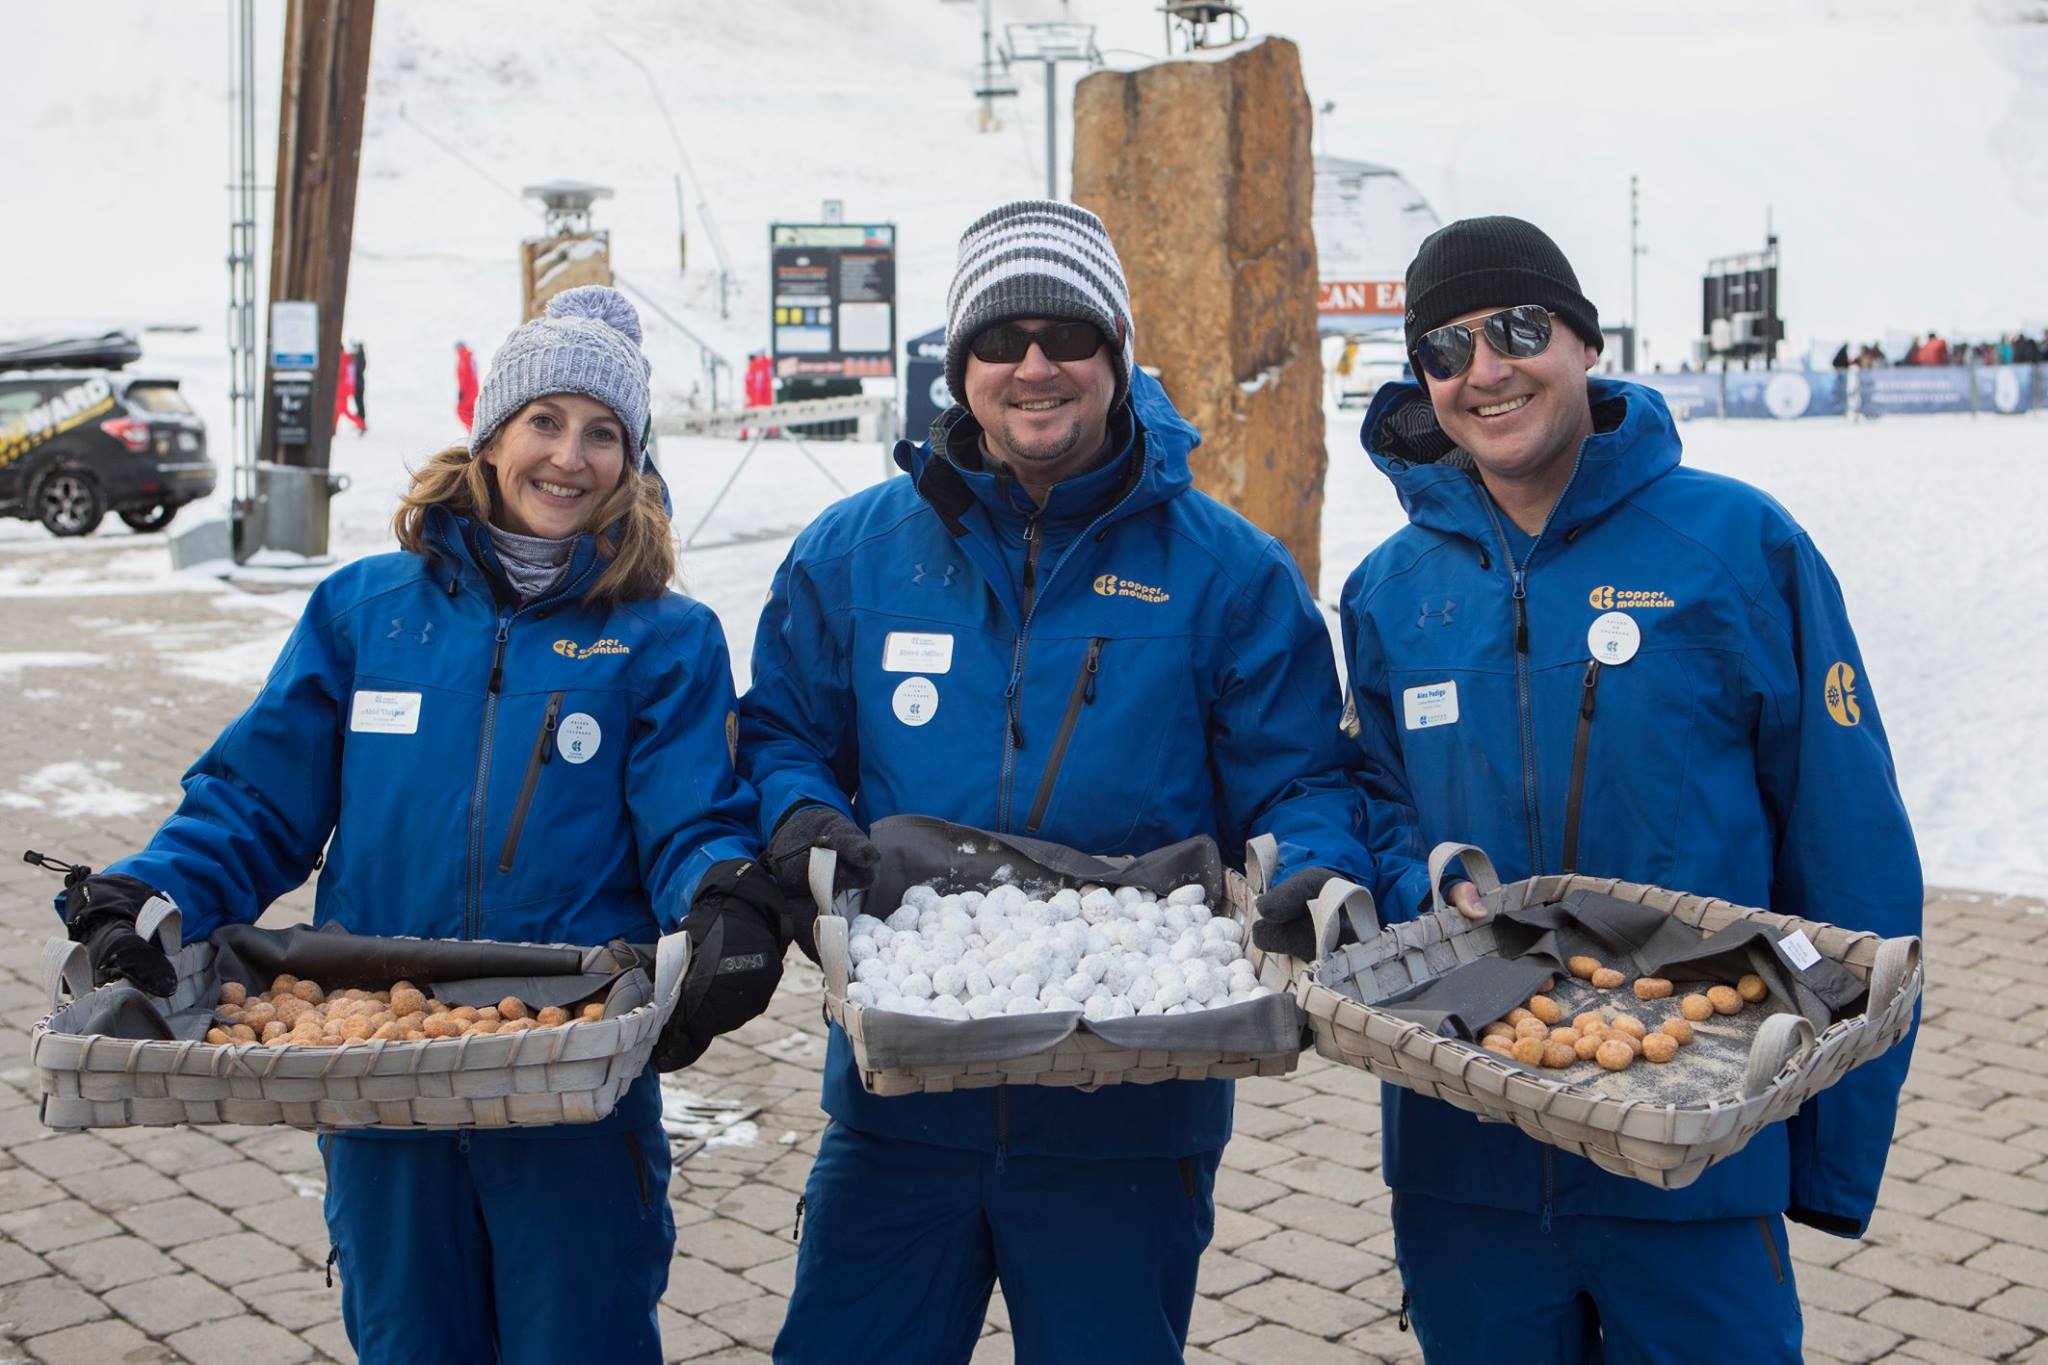 FREE DONUTS to top it off! PC: Copper Mountain Facebook Page